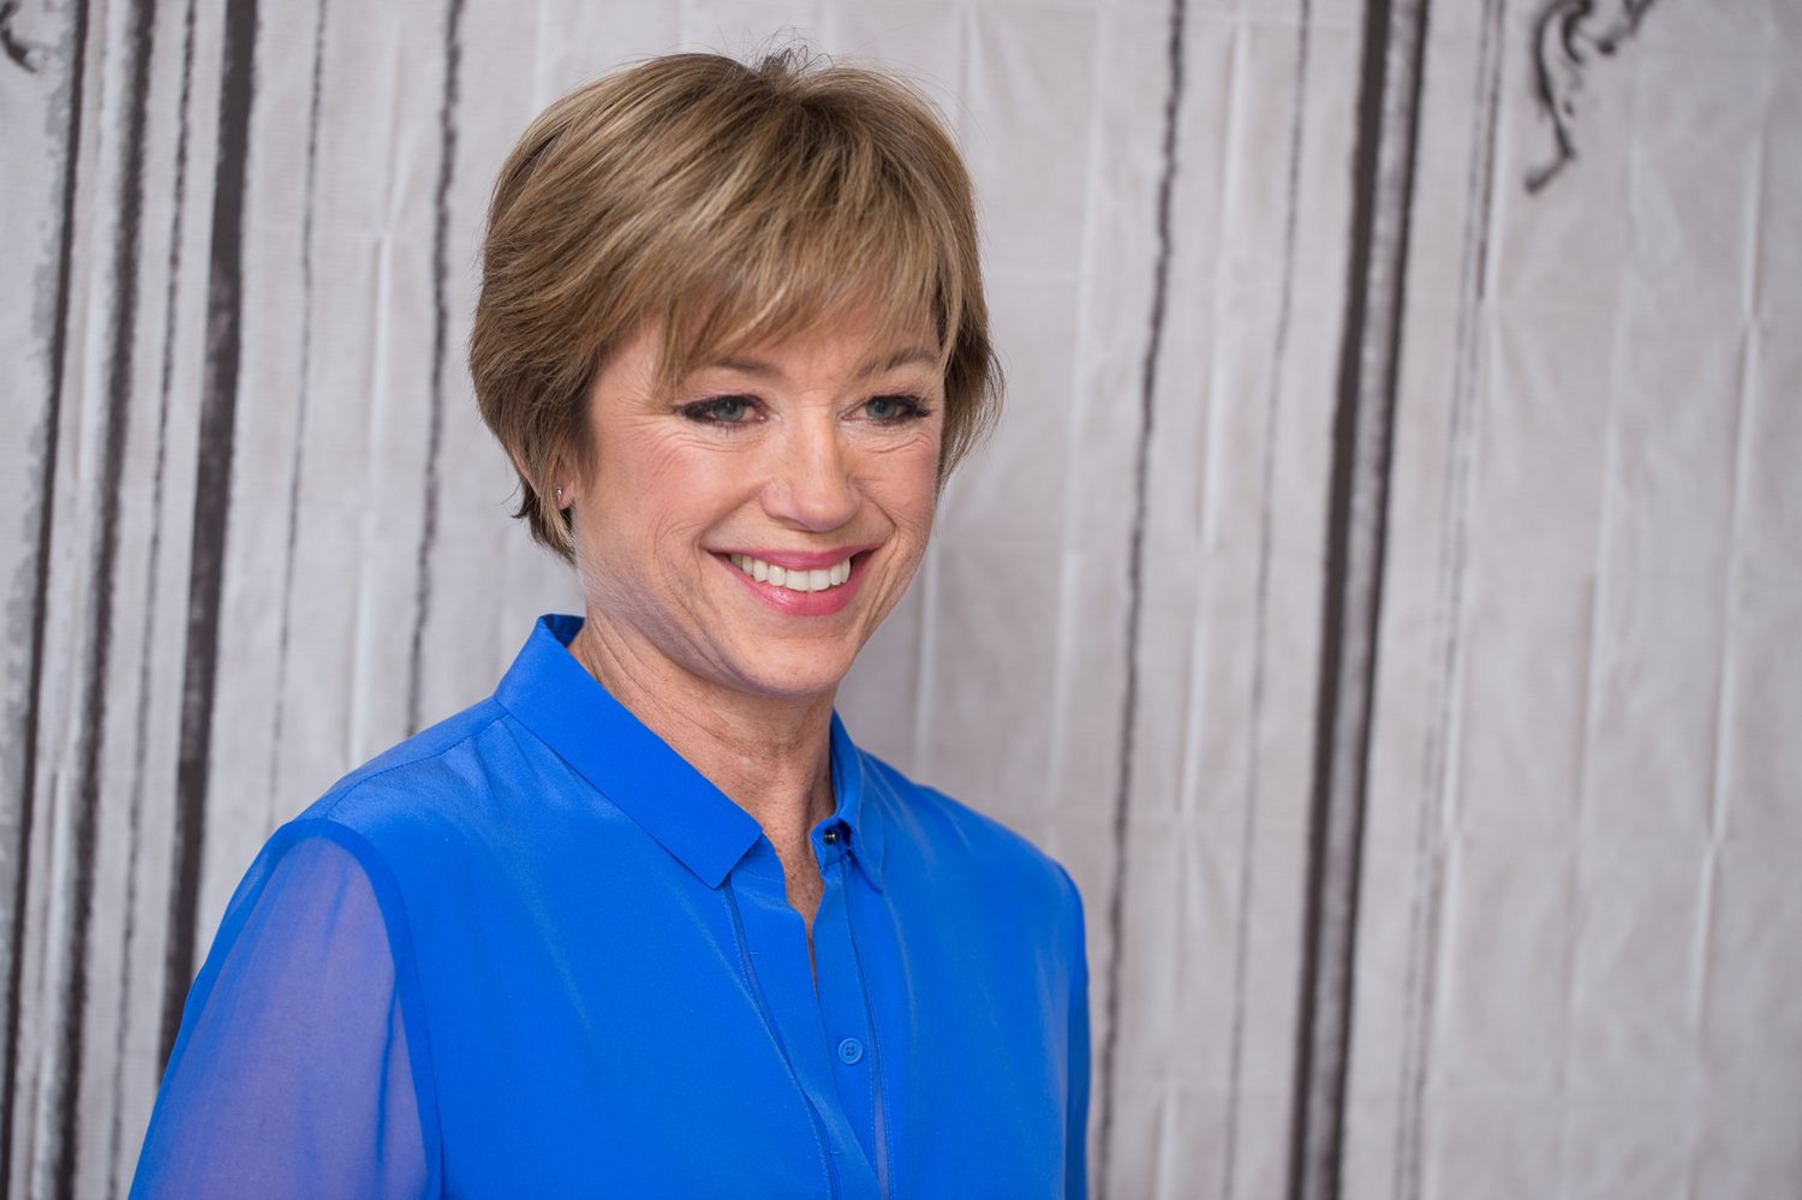 21 Extraordinary Facts About Dorothy Hamill - Facts.net